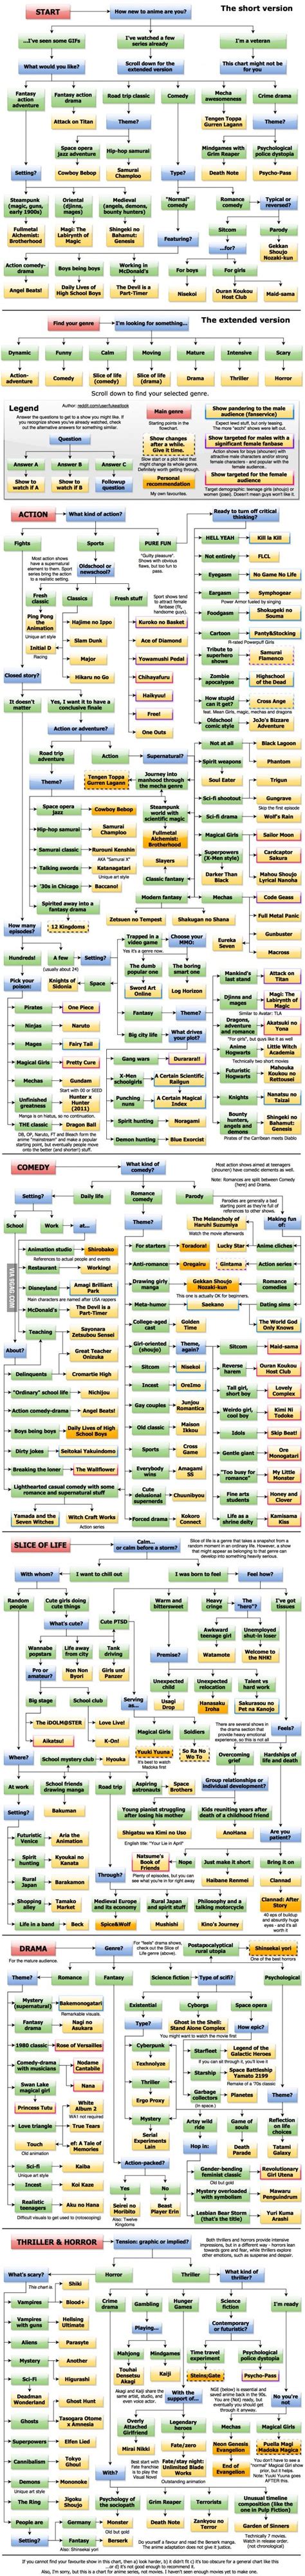 Anime Recommendation Flowchart For Beginners And Not Only By Genre Manga Anime All Anime